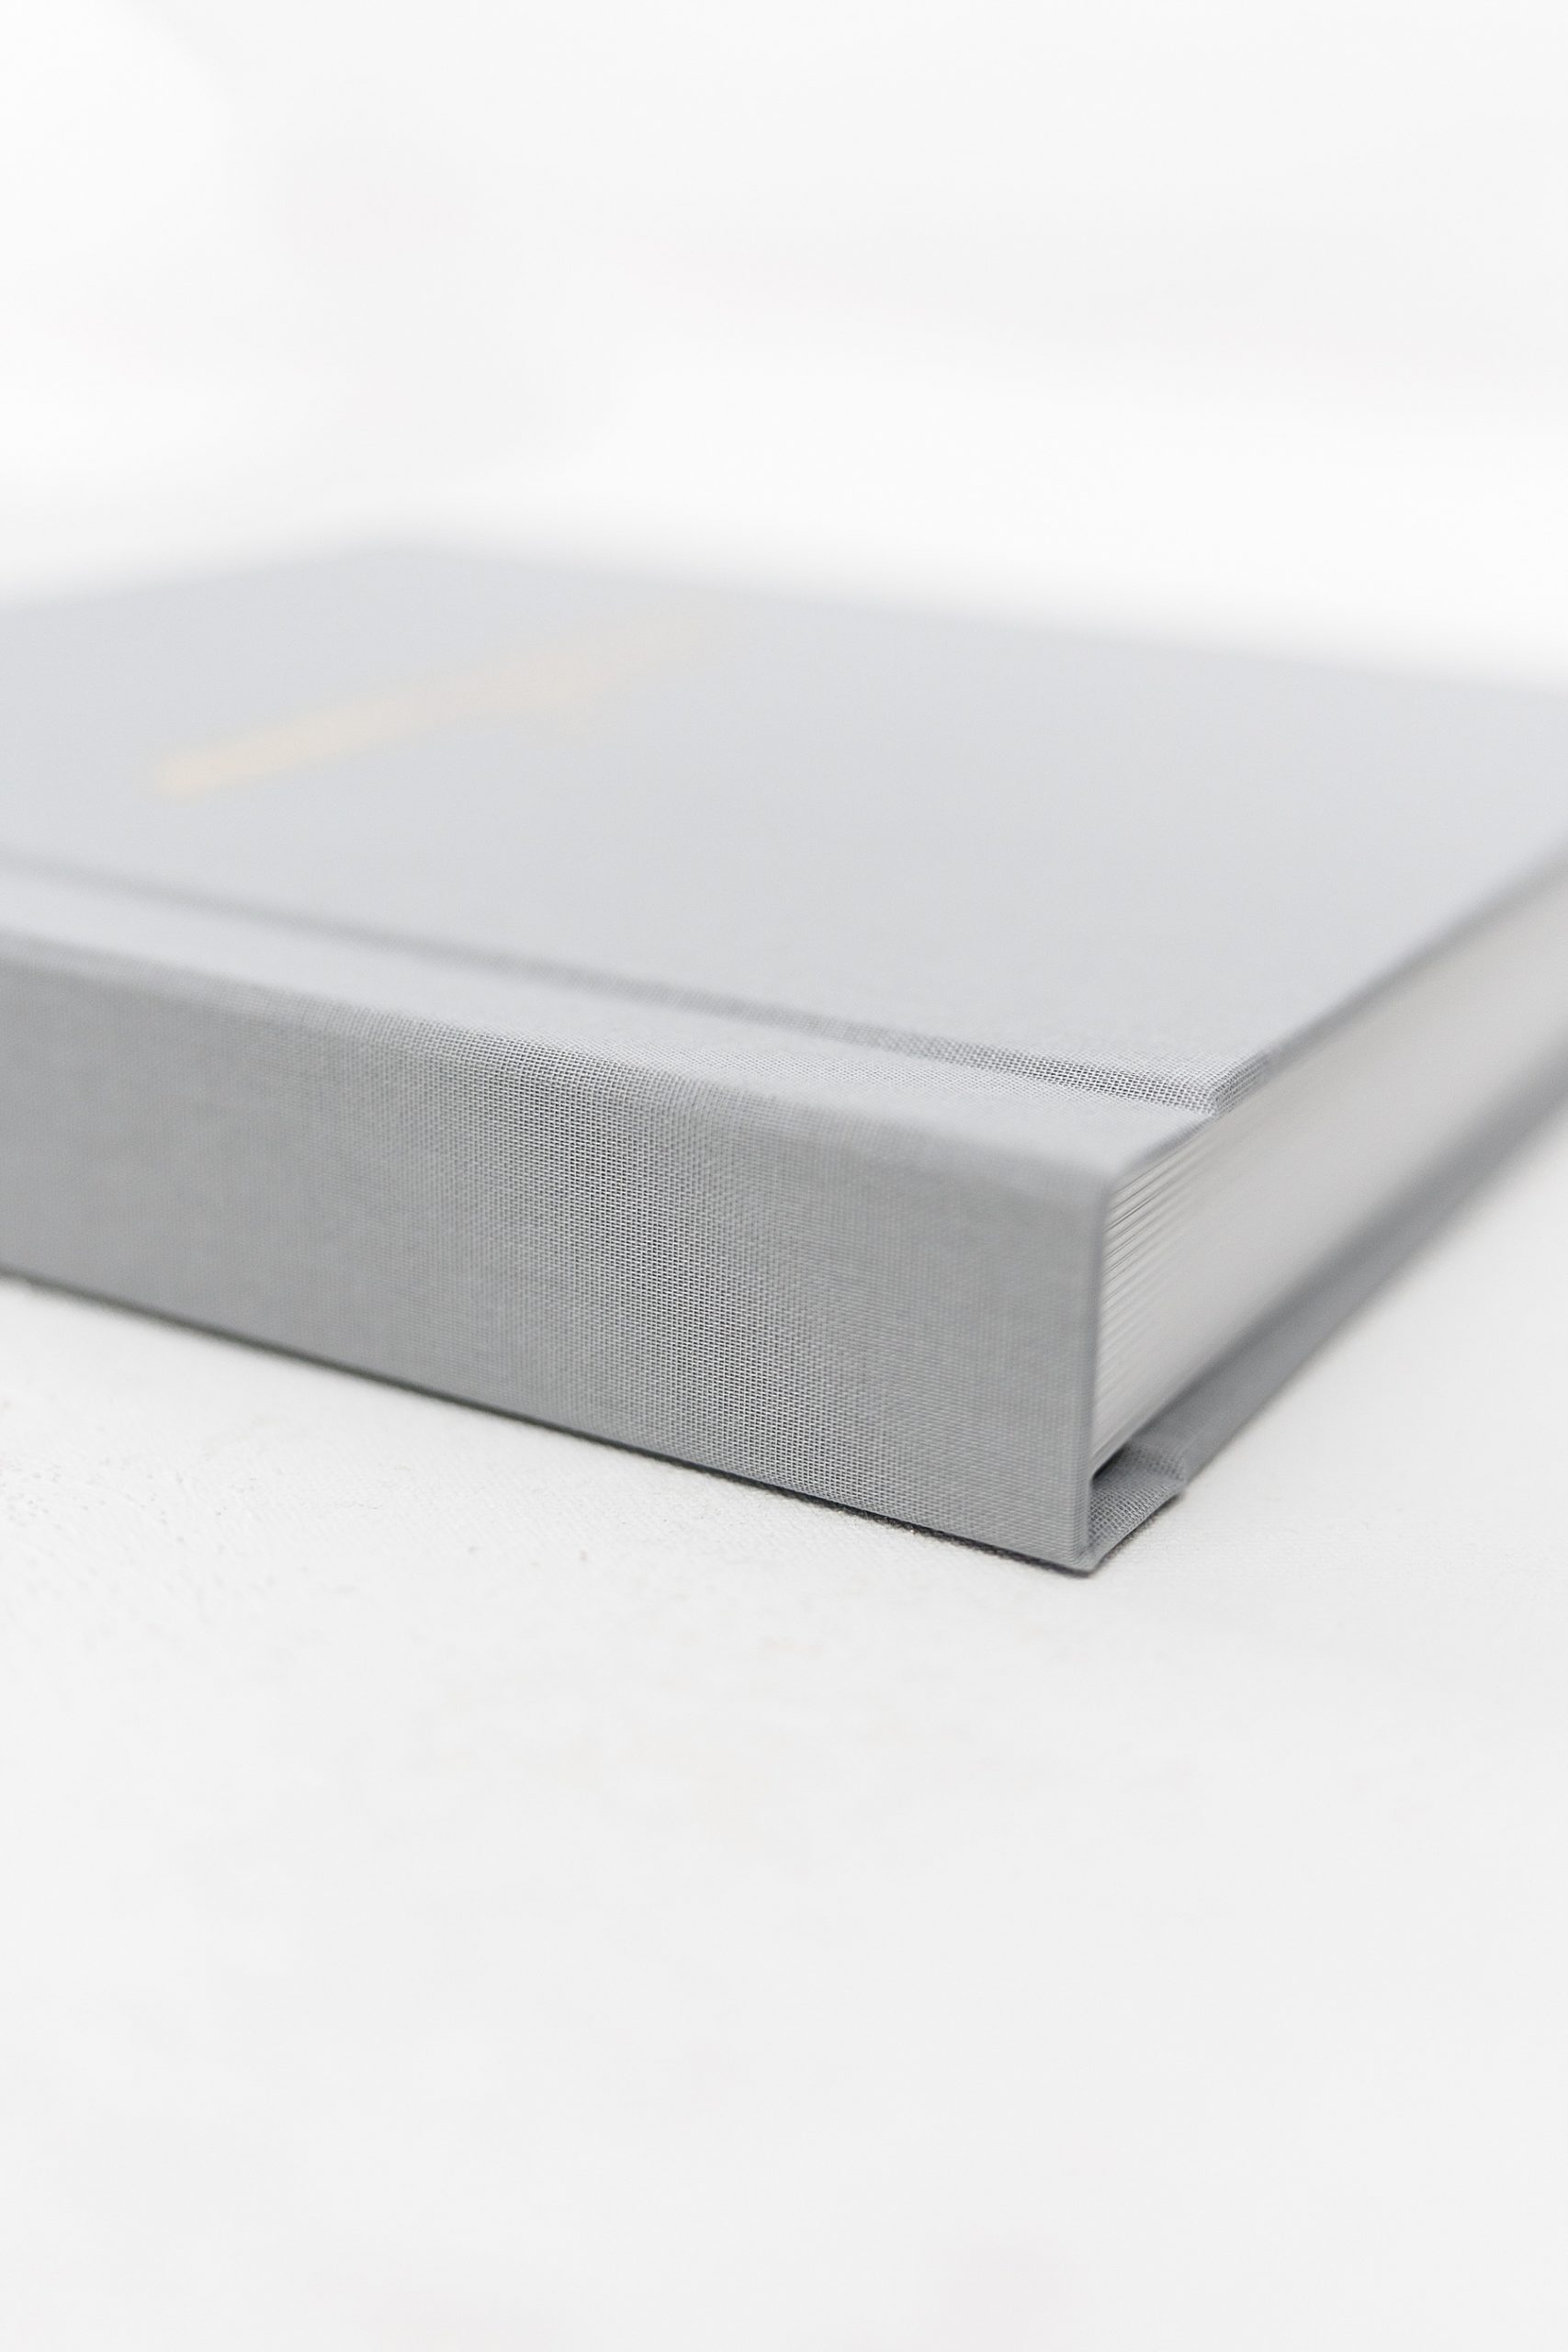 image of the thickness of an heirloom wedding album. Dekora albums. Brittany Navin Photography